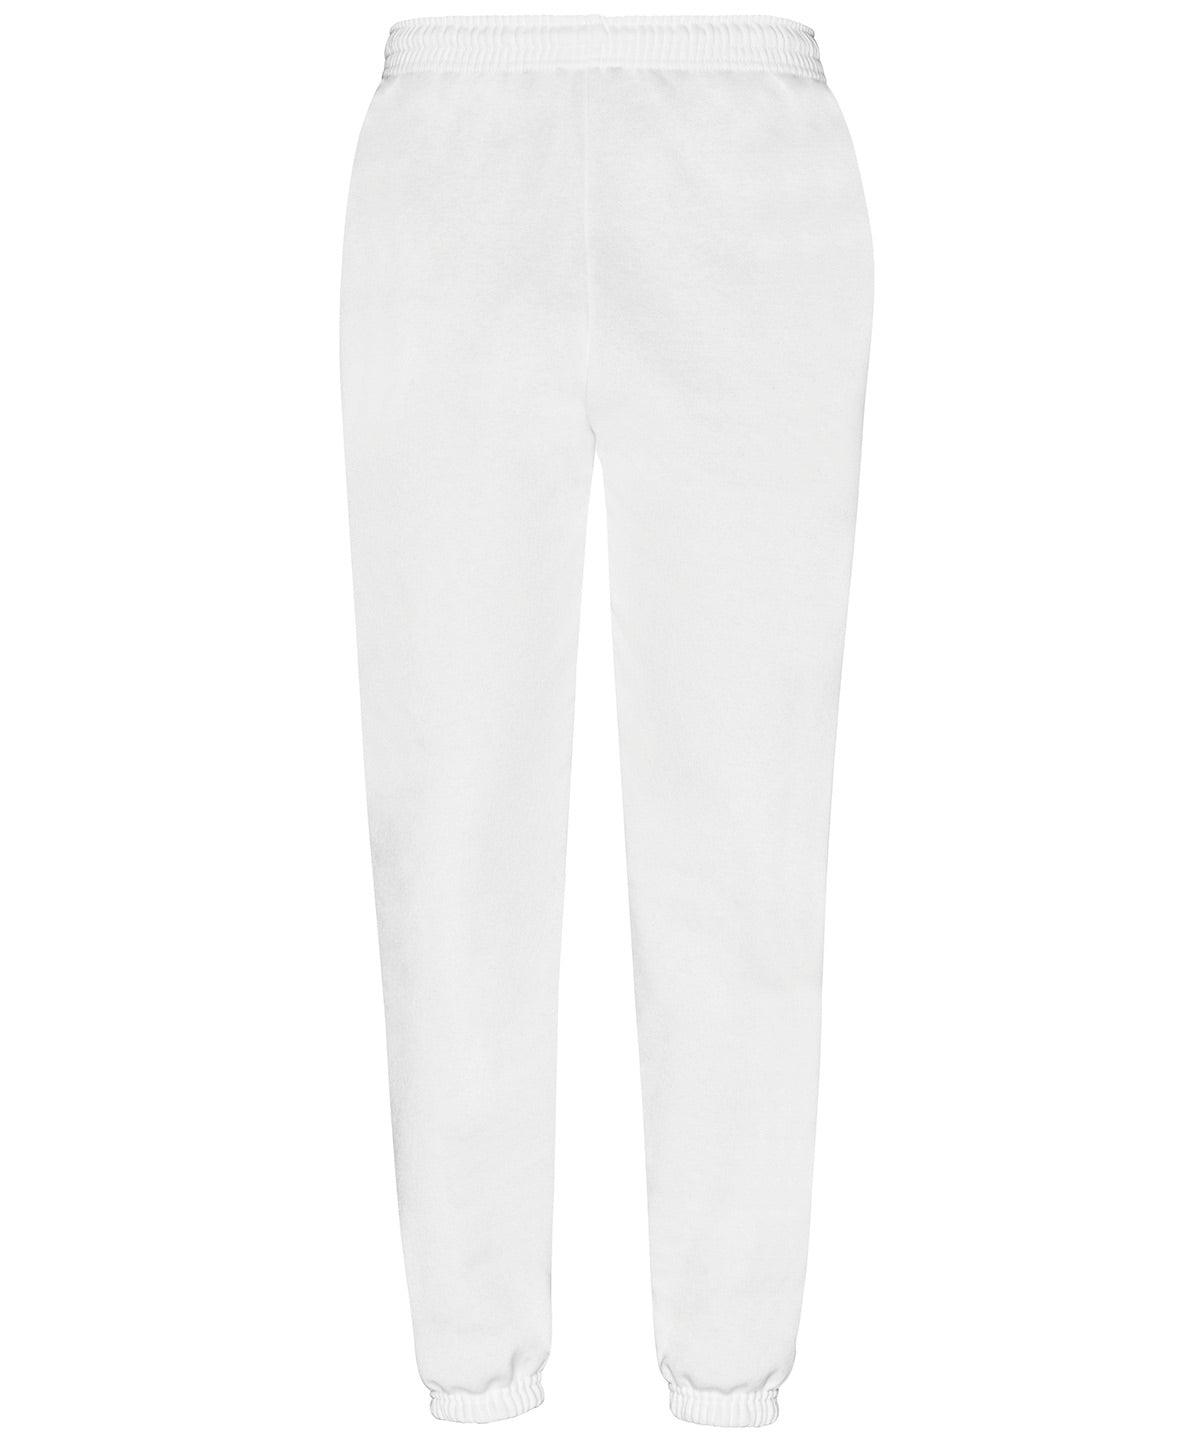 White*† - Classic 80/20 elasticated sweatpants Sweatpants Fruit of the Loom Co-ords, Joggers, Must Haves, New Products – February Launch, New Sizes for 2021, New Sizes for 2023, Plus Sizes Schoolwear Centres